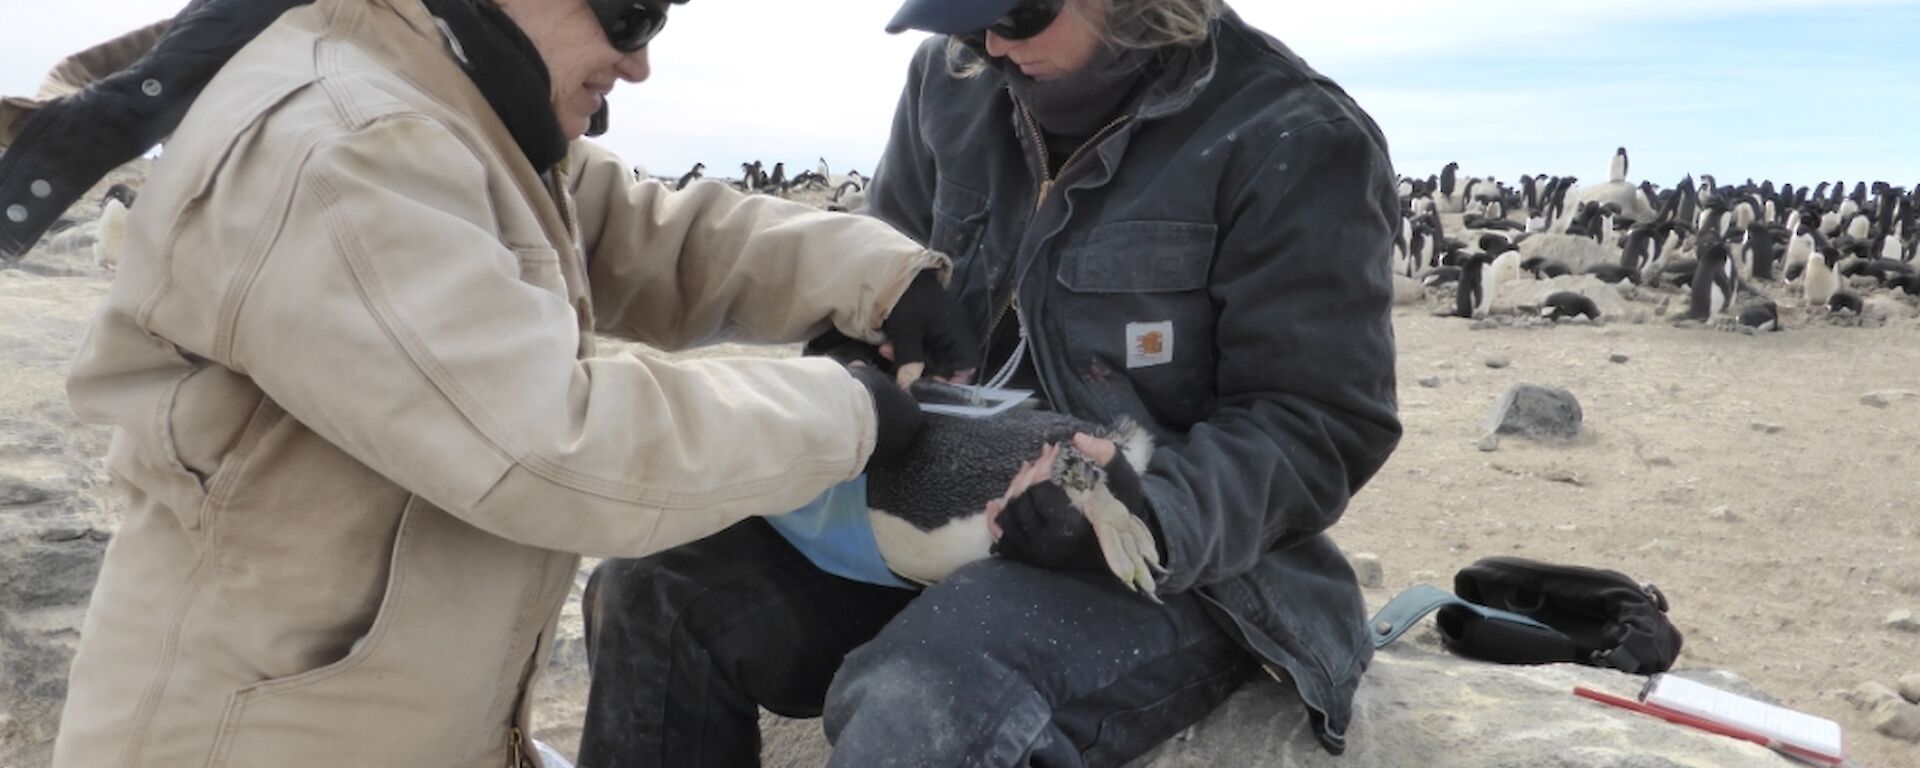 A expeditioner sitting on a rock with the Adélie penguin across her lap, while Anna is gluing a satellite tracker onto the pneugins lower back. The penguin colony is behind them.